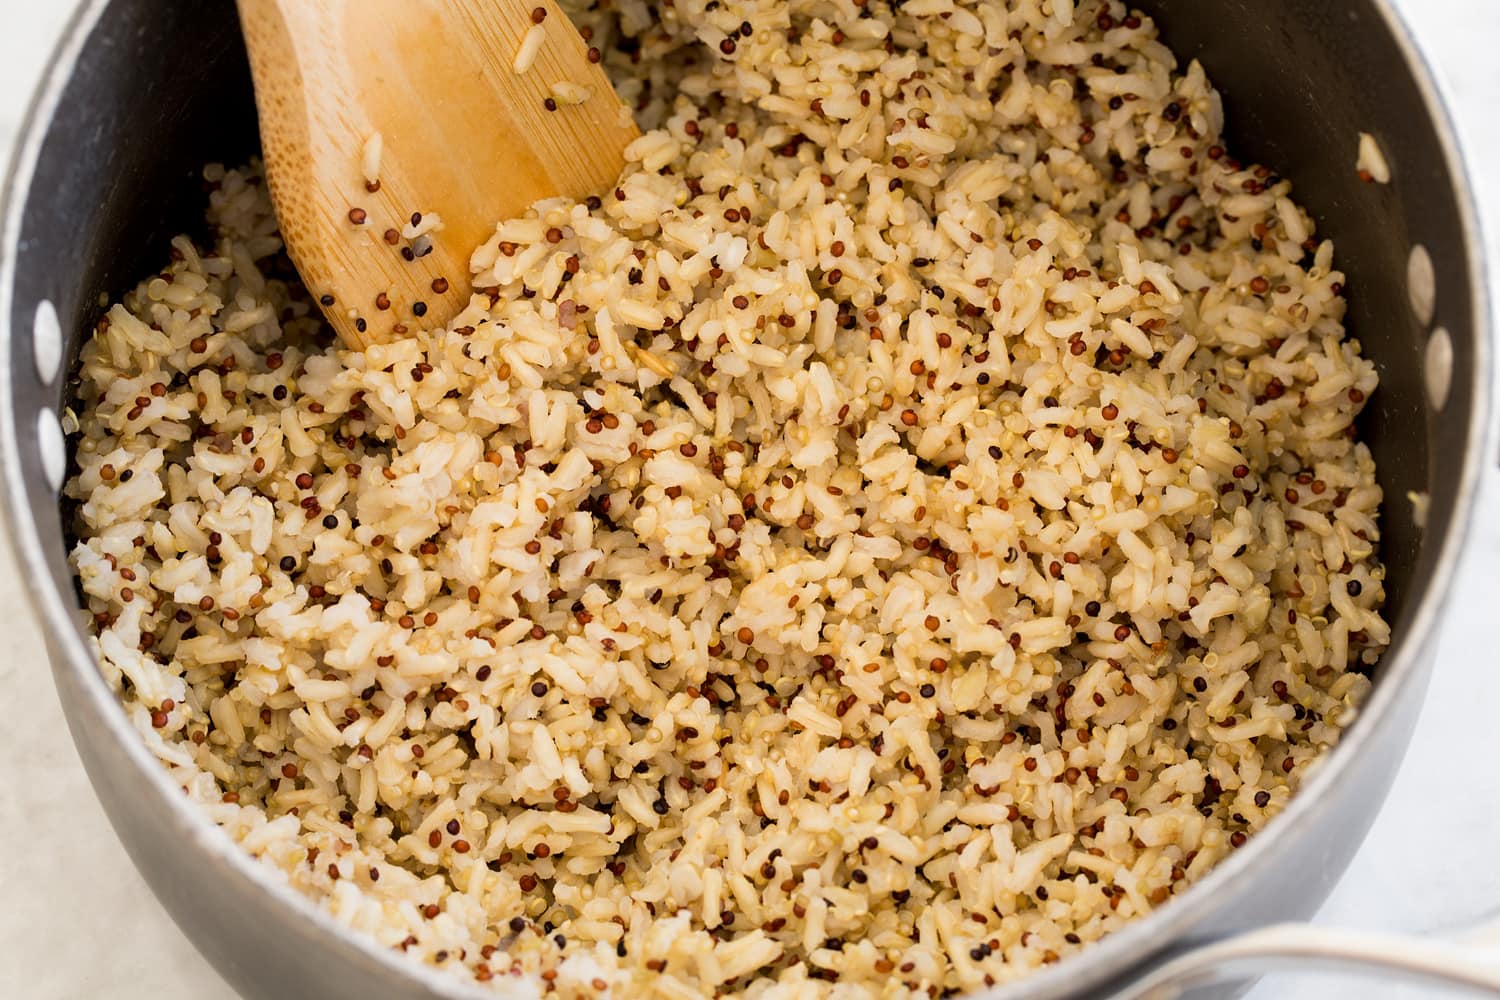 Brown rice and quinoa tossed together.